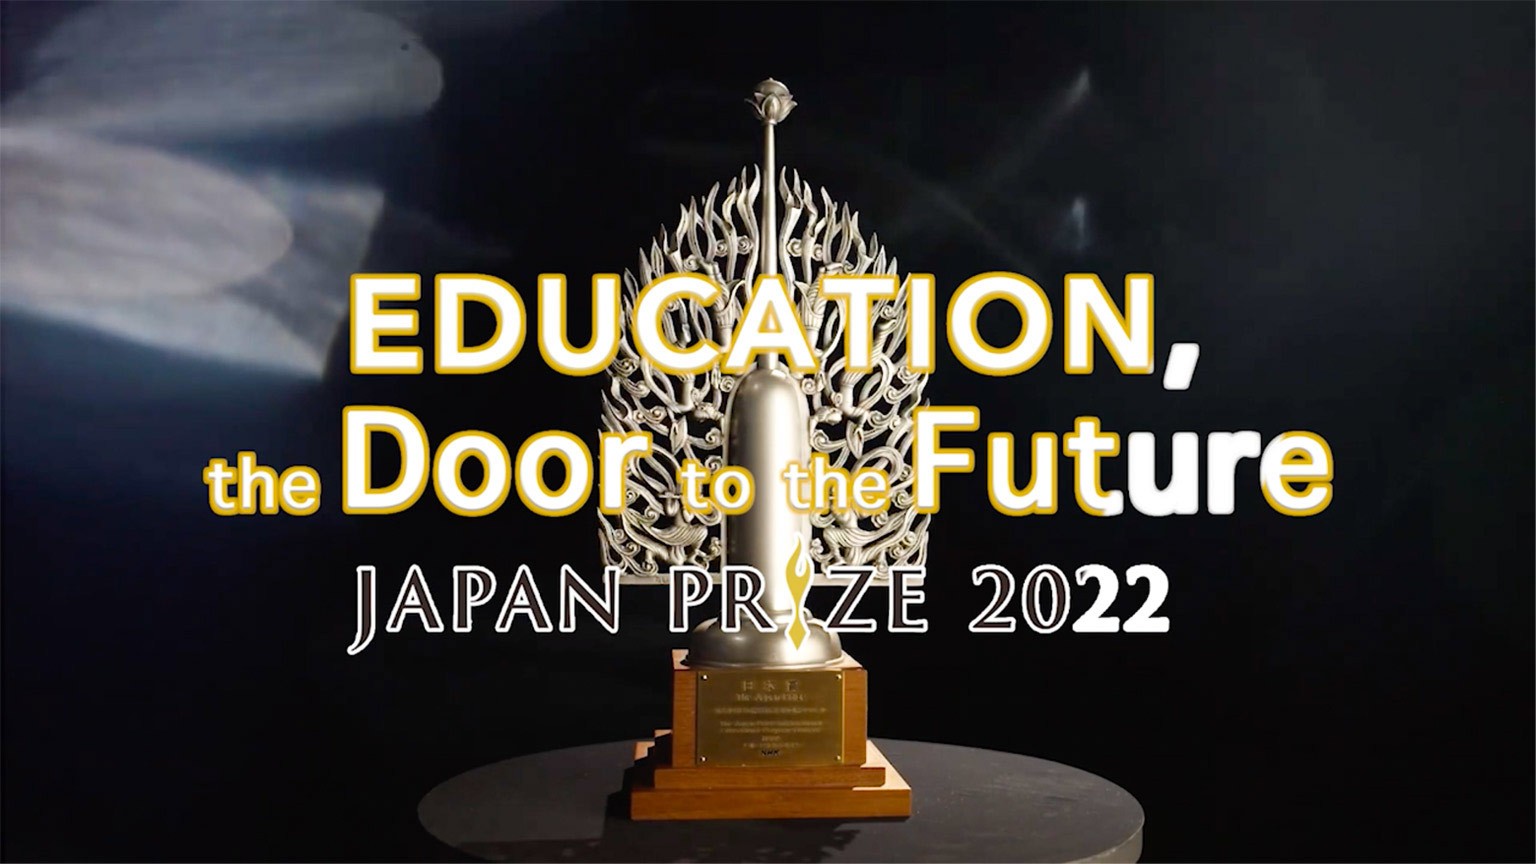 Education, the Door to the Future: Japan Prize 2022